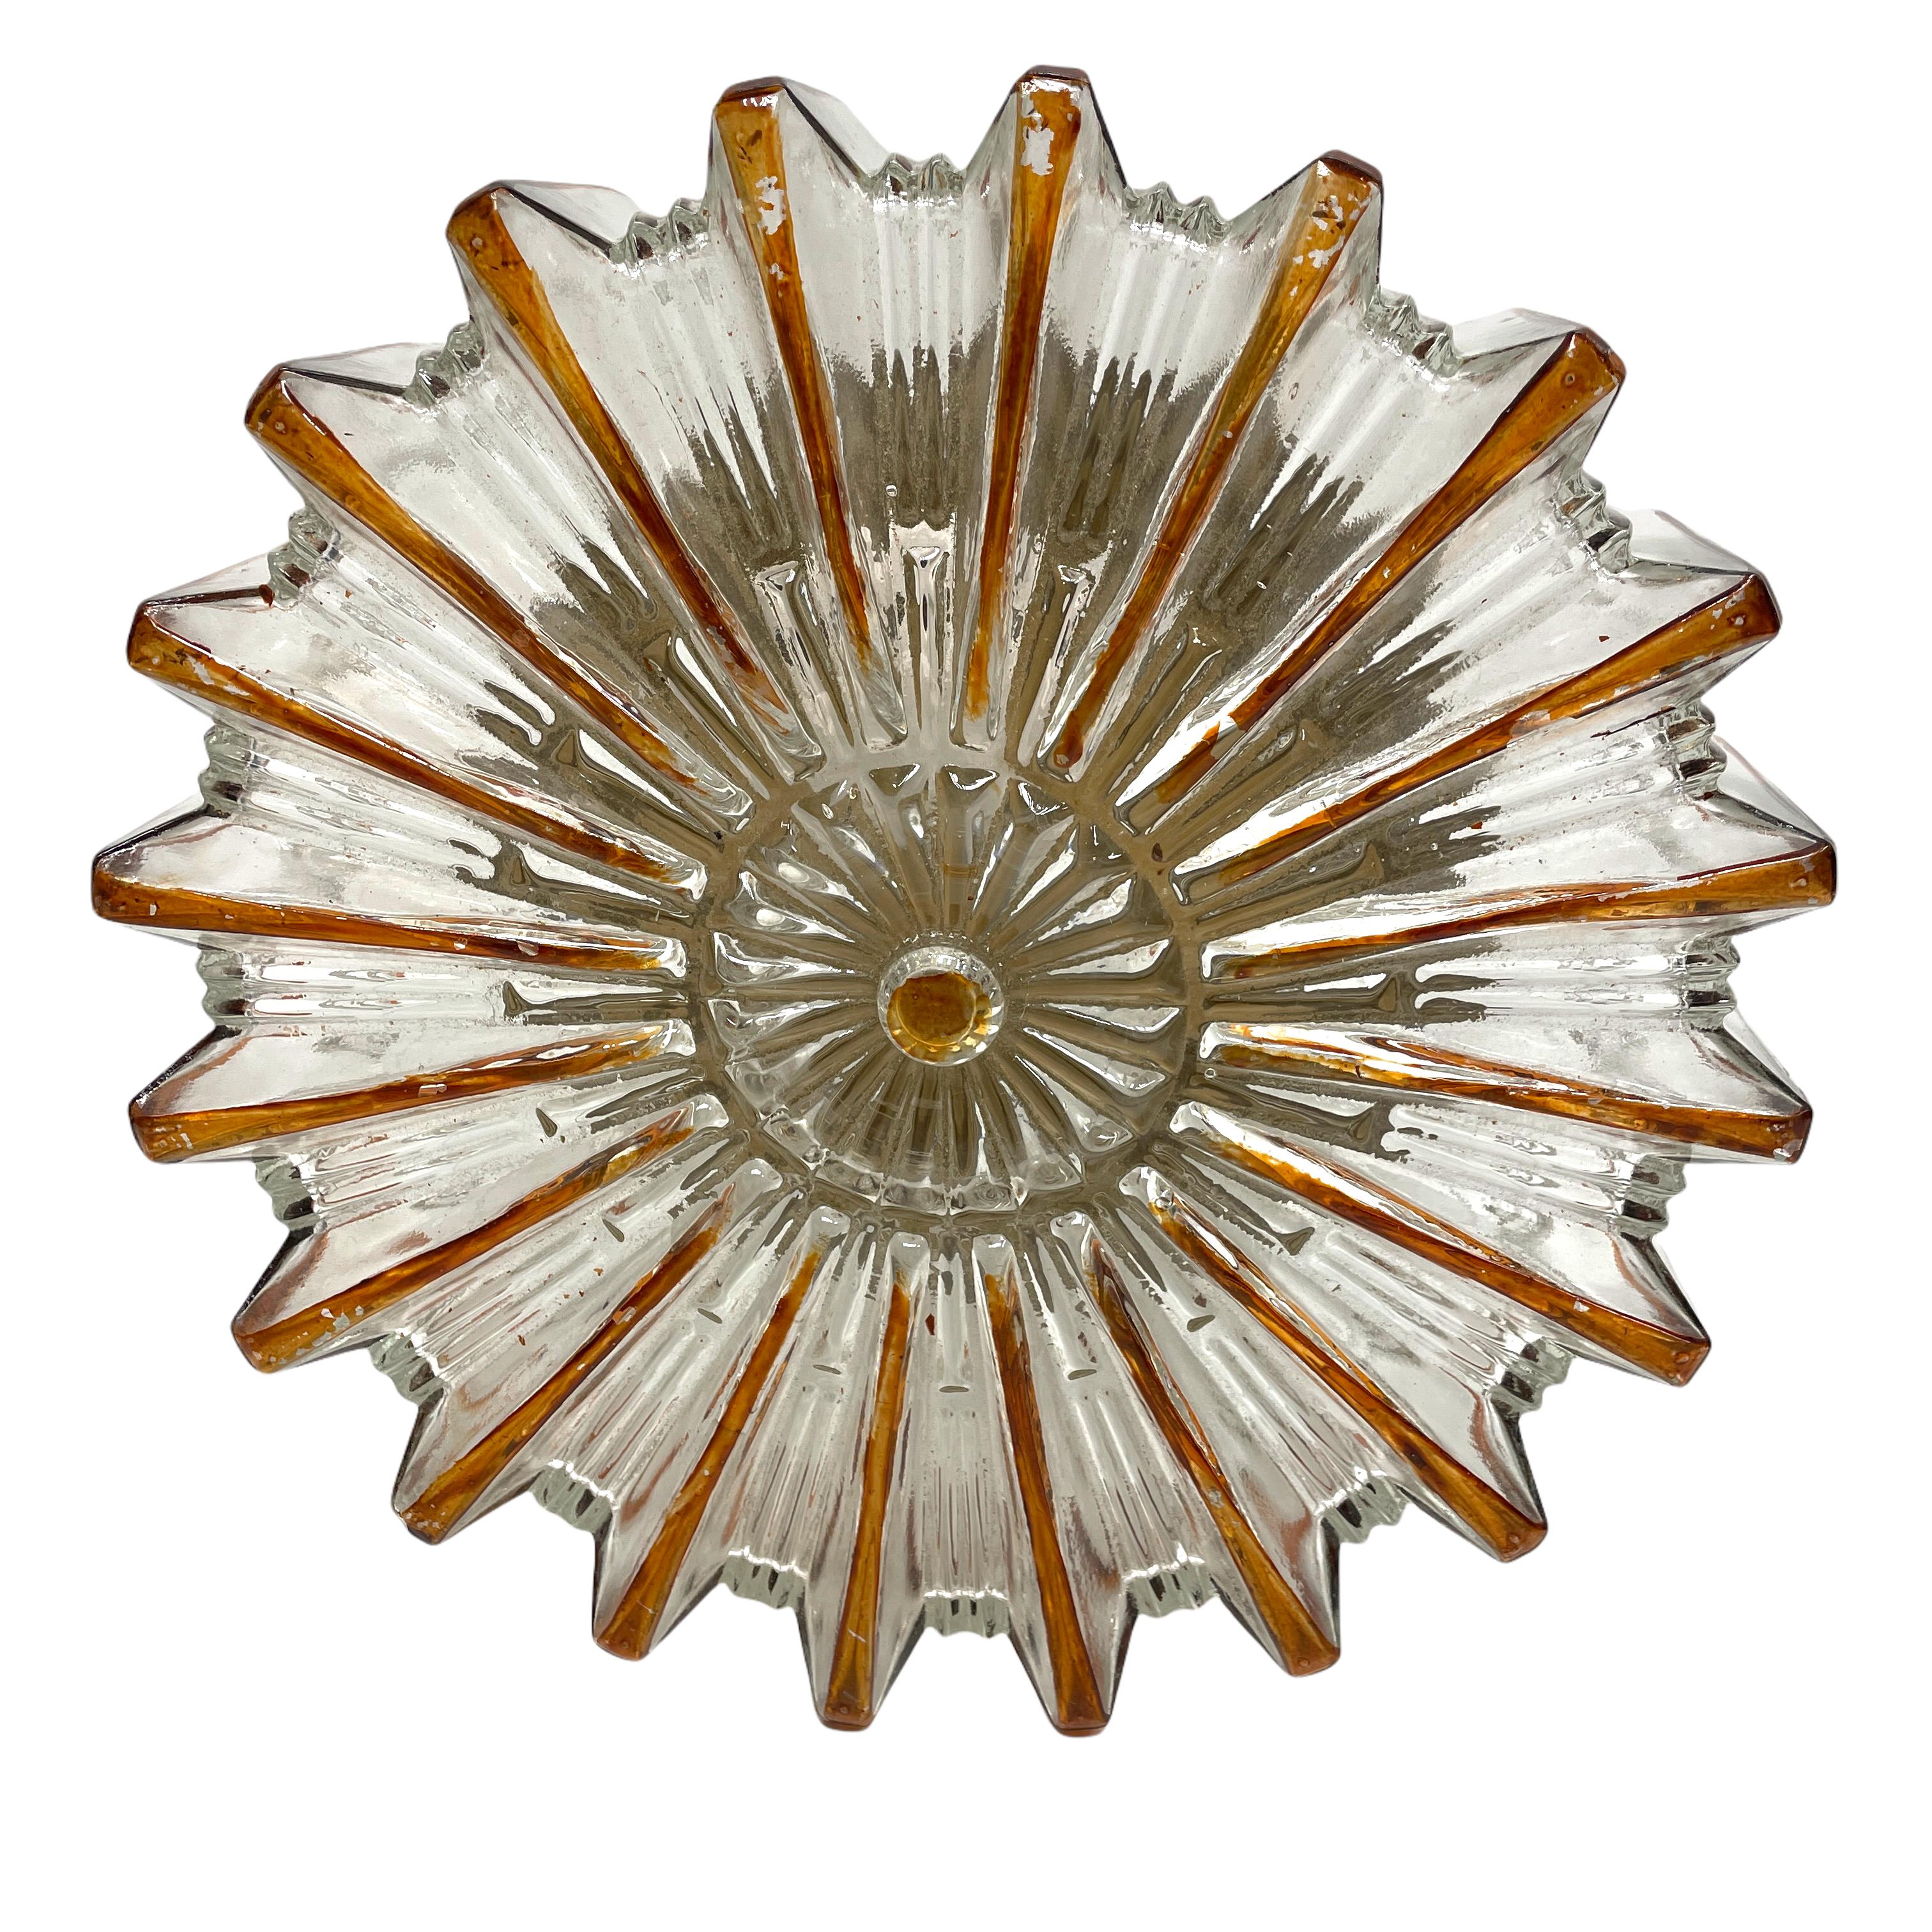 Beautiful starburst pattern flush mount. Made in Germany by Glashuette Limburg. Gorgeous textured glass flush mount with metal fixture. The Fixture requires one European E27 / 110 Volt Edison bulb, up to 100 watts.